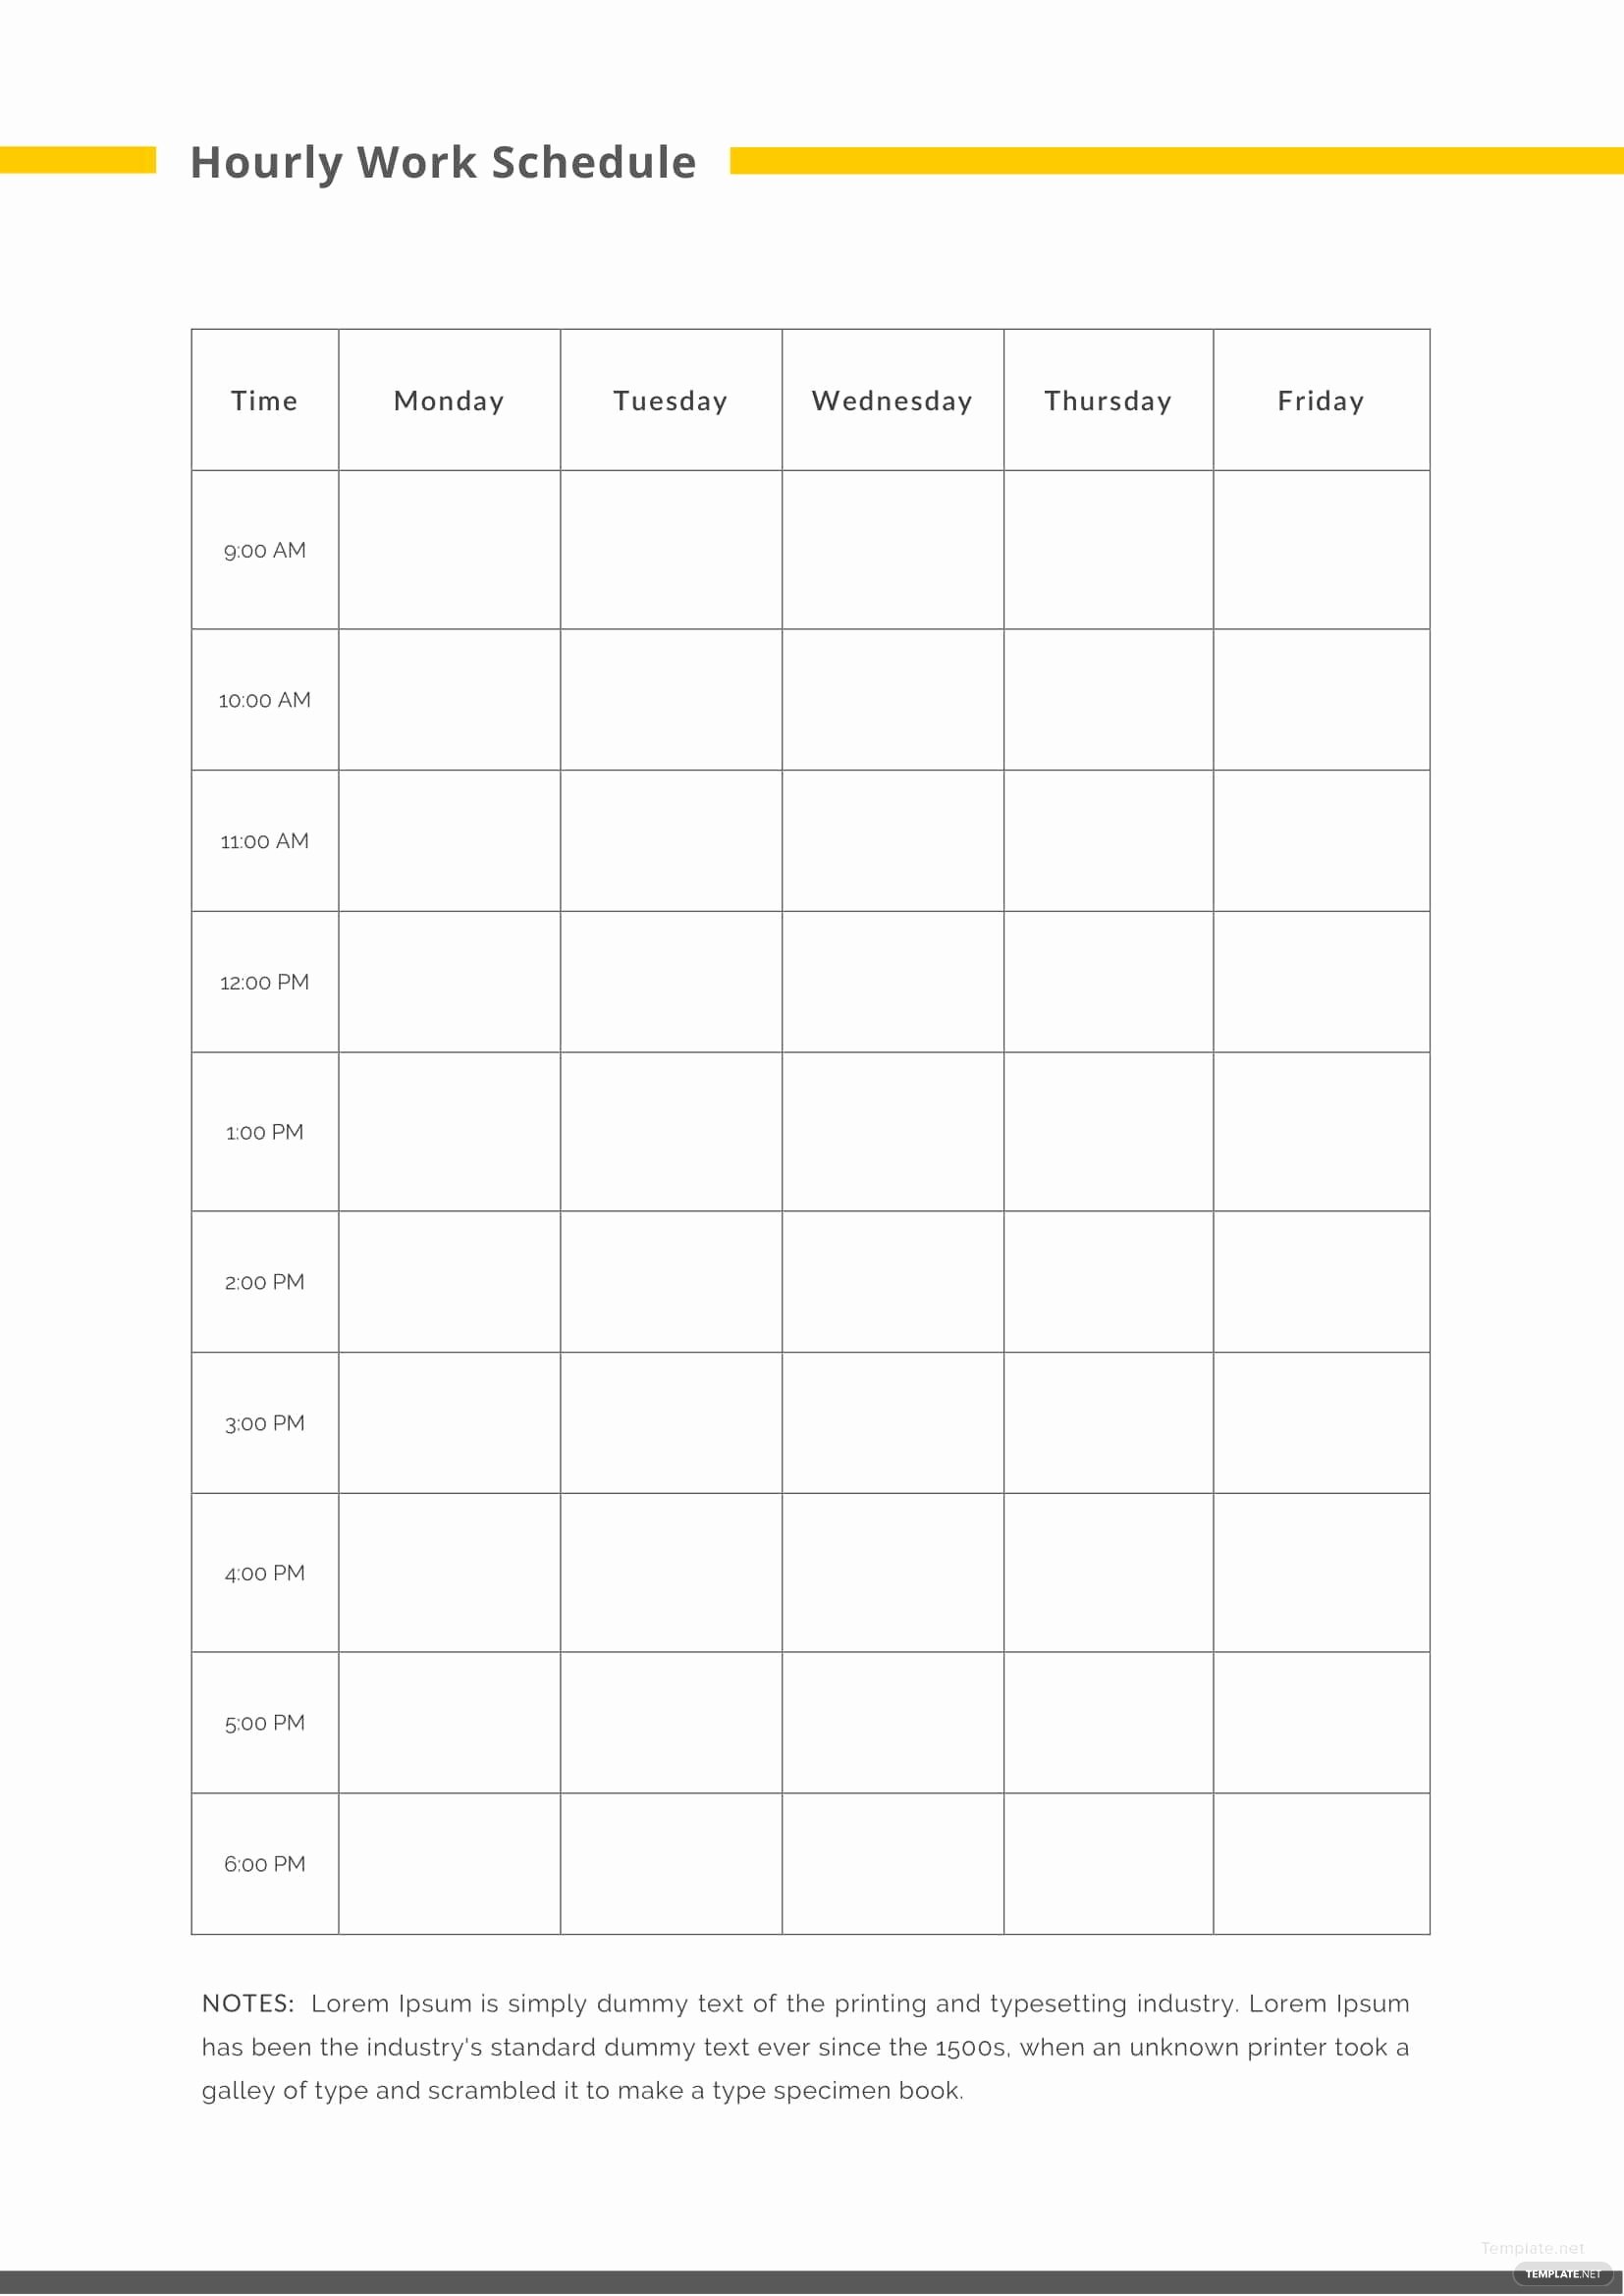 Hourly Schedule Template Word Awesome Hourly Work Schedule Template In Microsoft Word